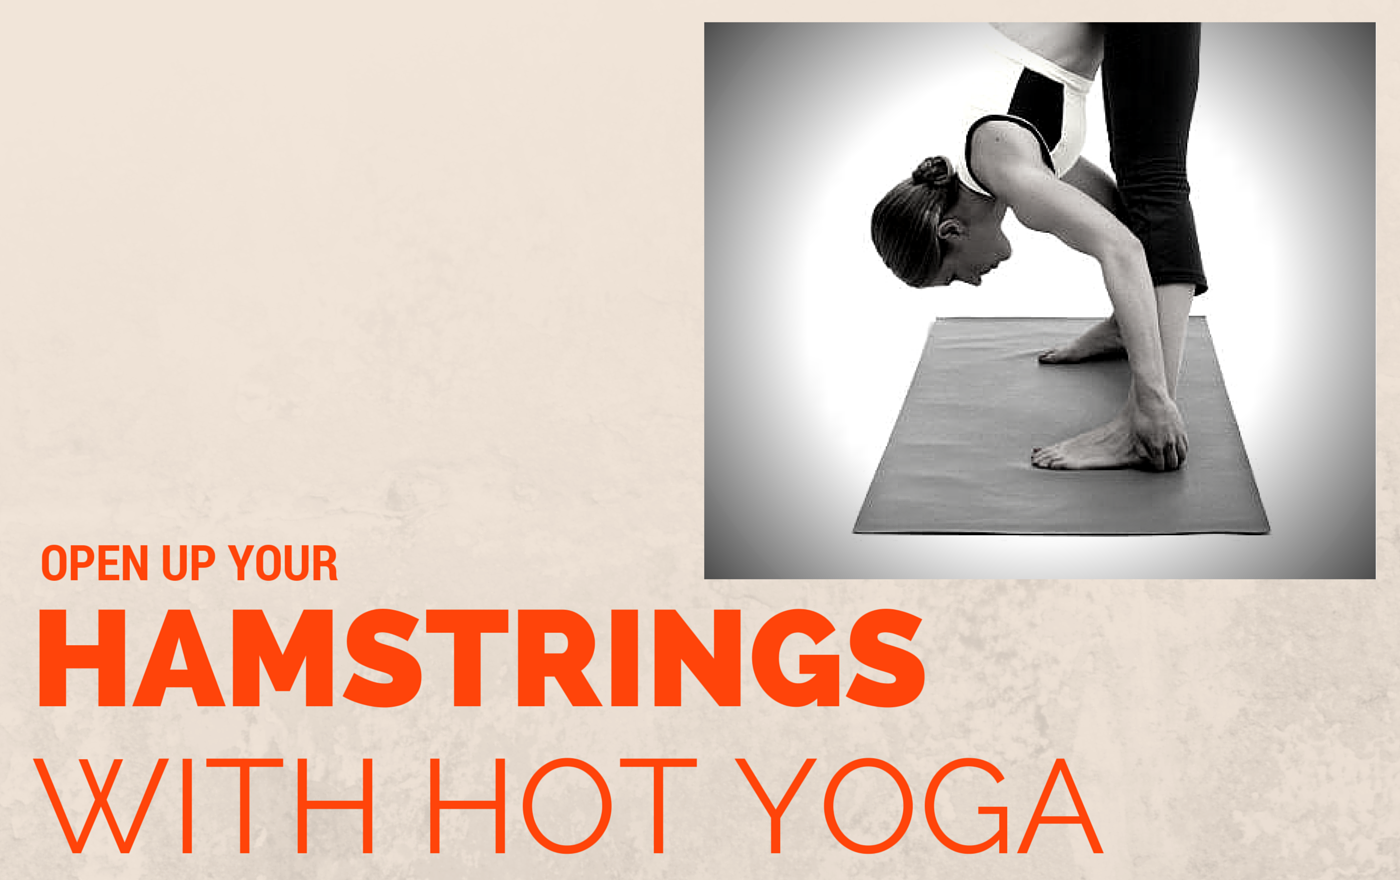 Stretching hamstrings with Yoga - Hot Yoga Doctor